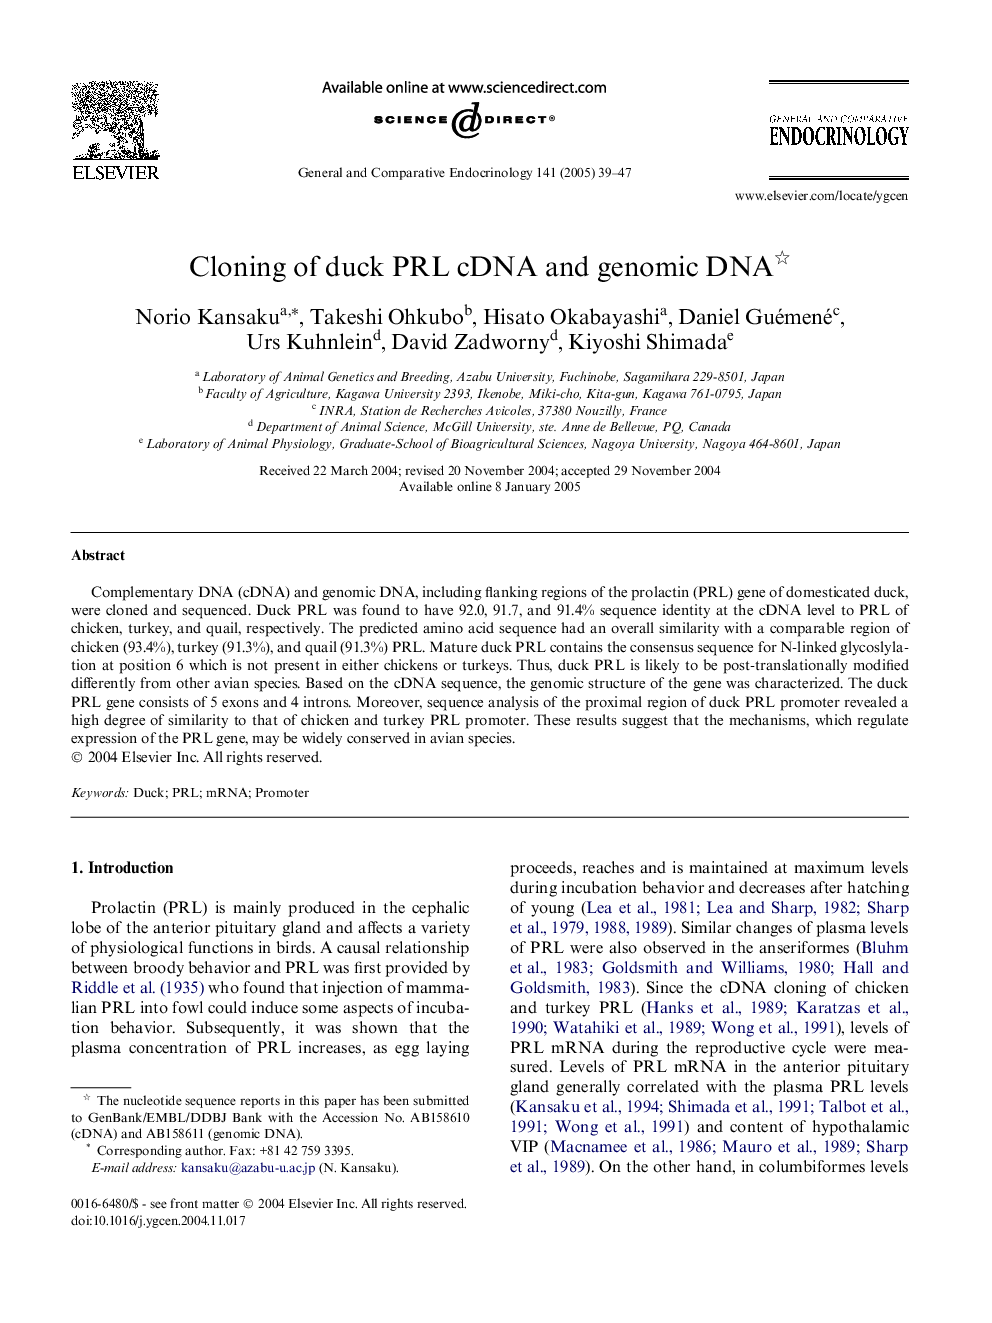 Cloning of duck PRL cDNA and genomic DNA